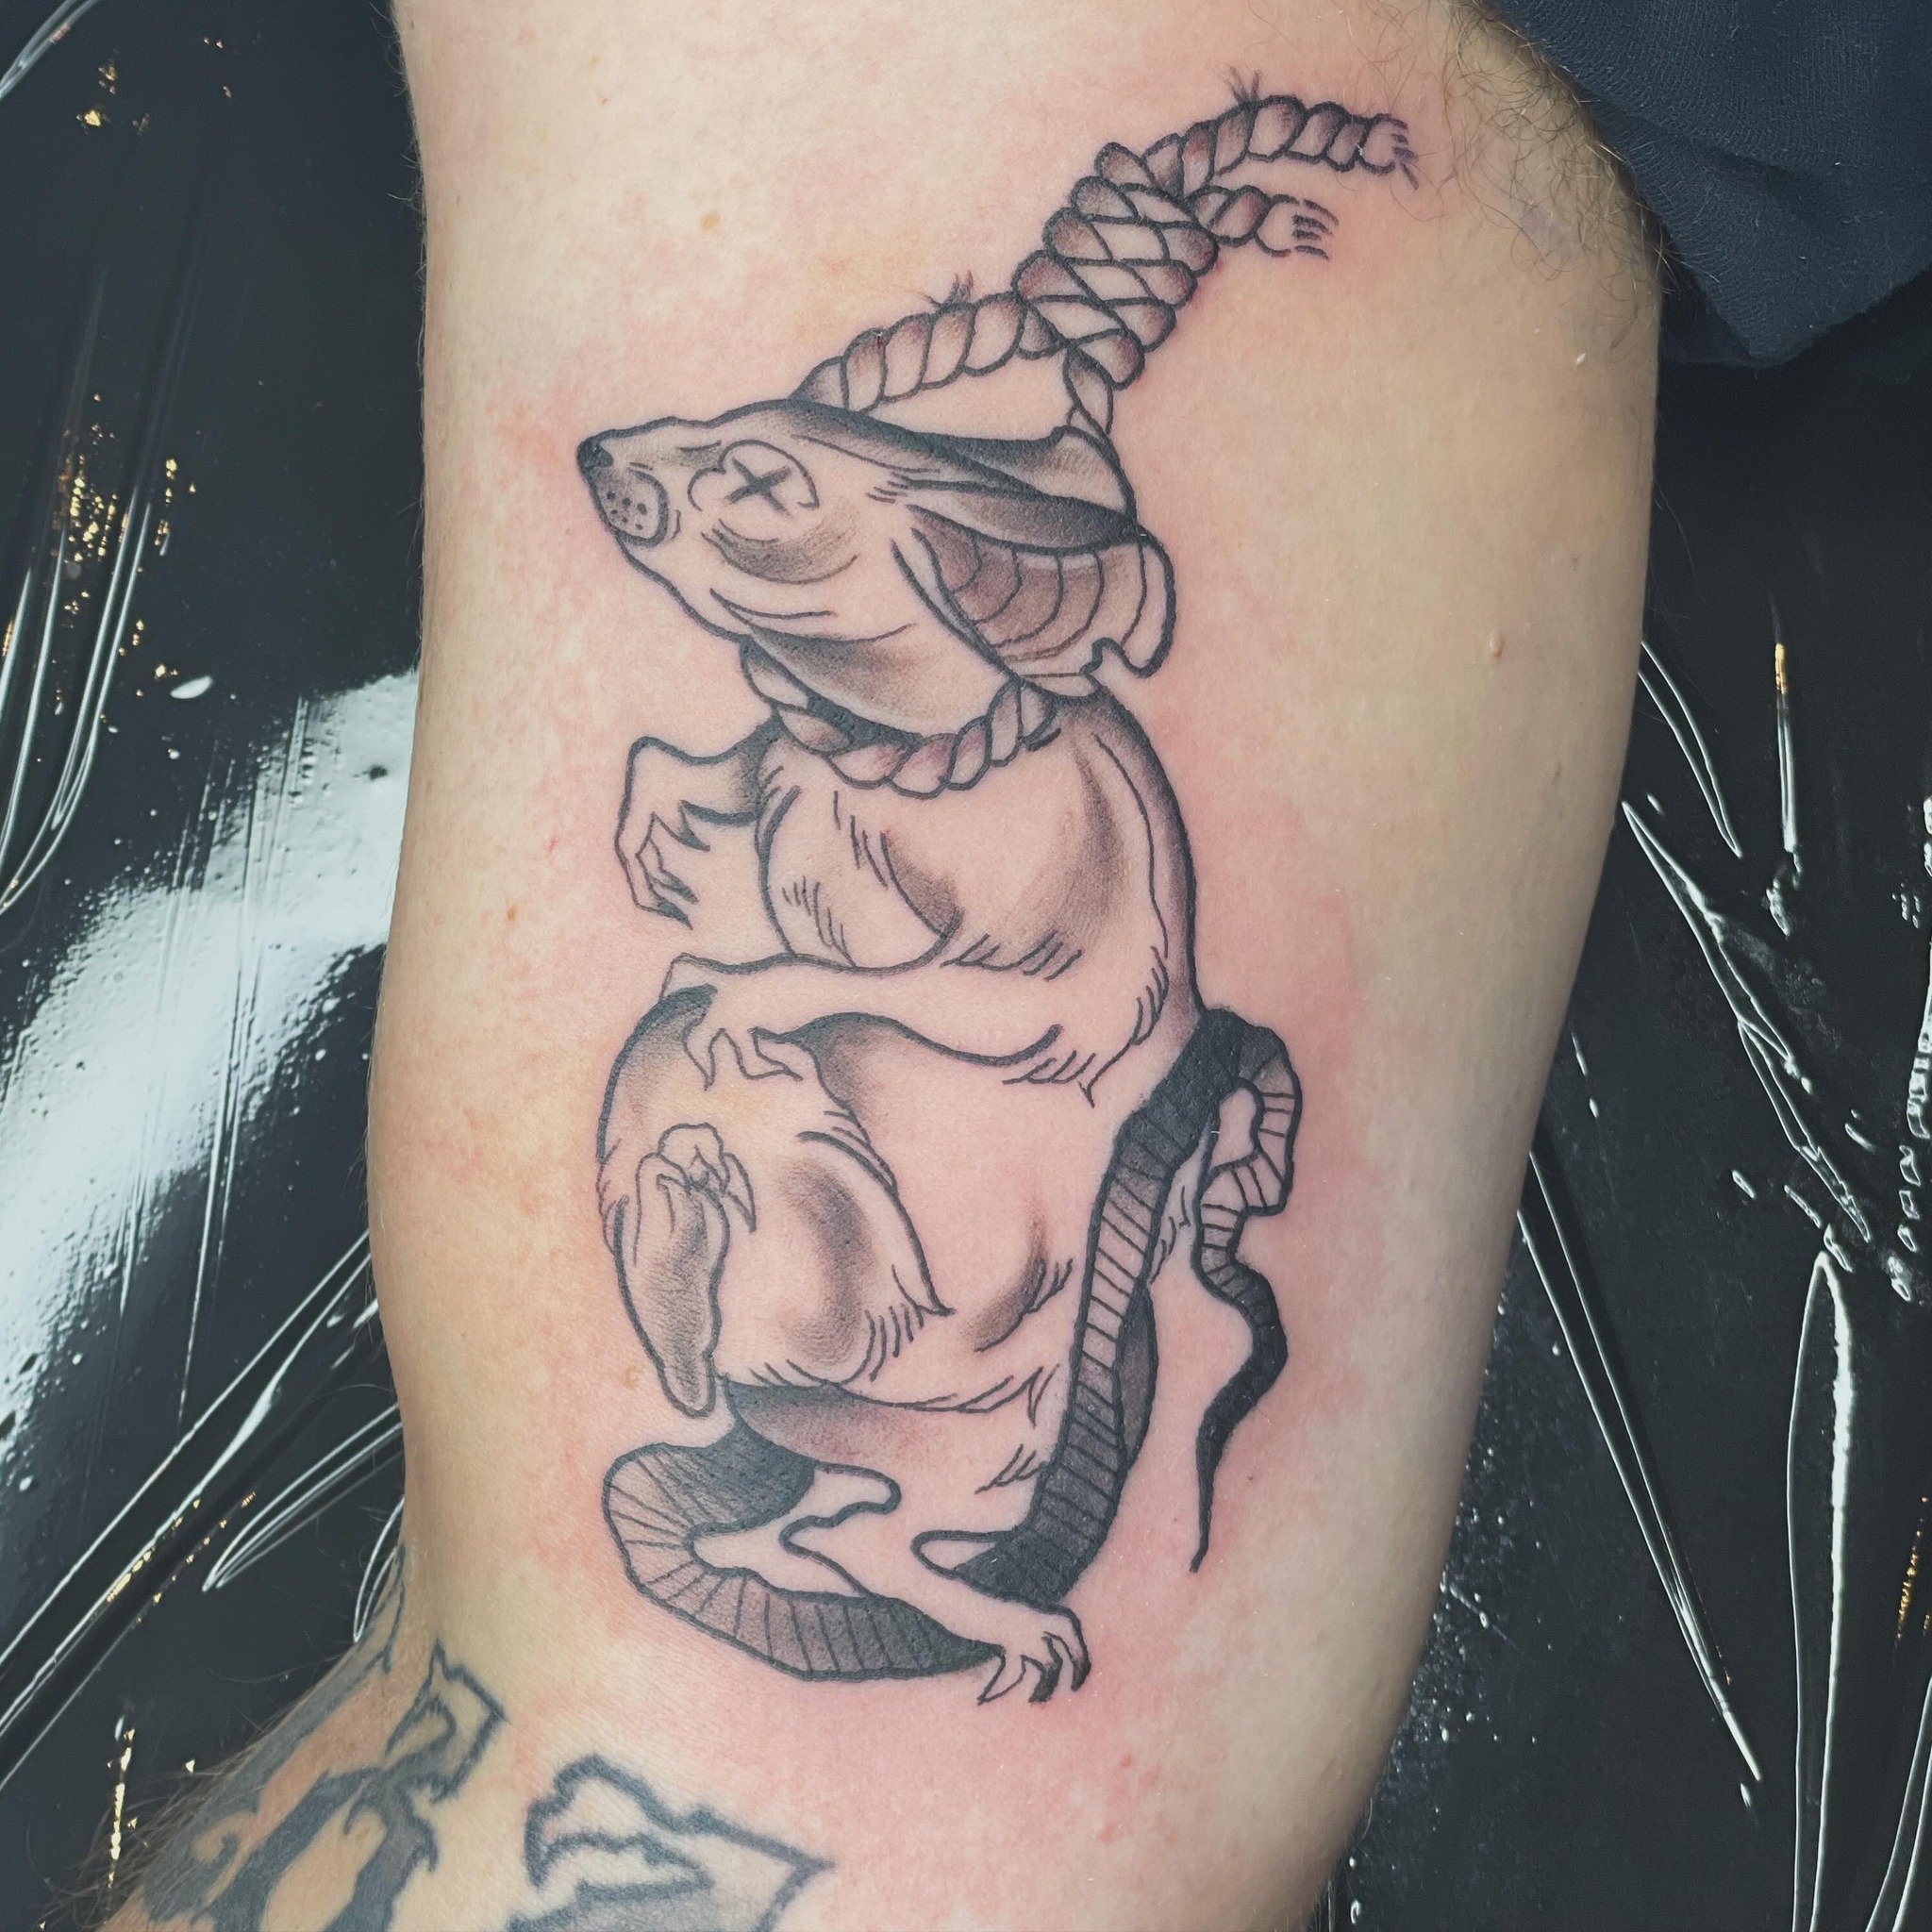 🧀🐀
.
.
.
.
.
As always, thanks for looking. Link in bio to book